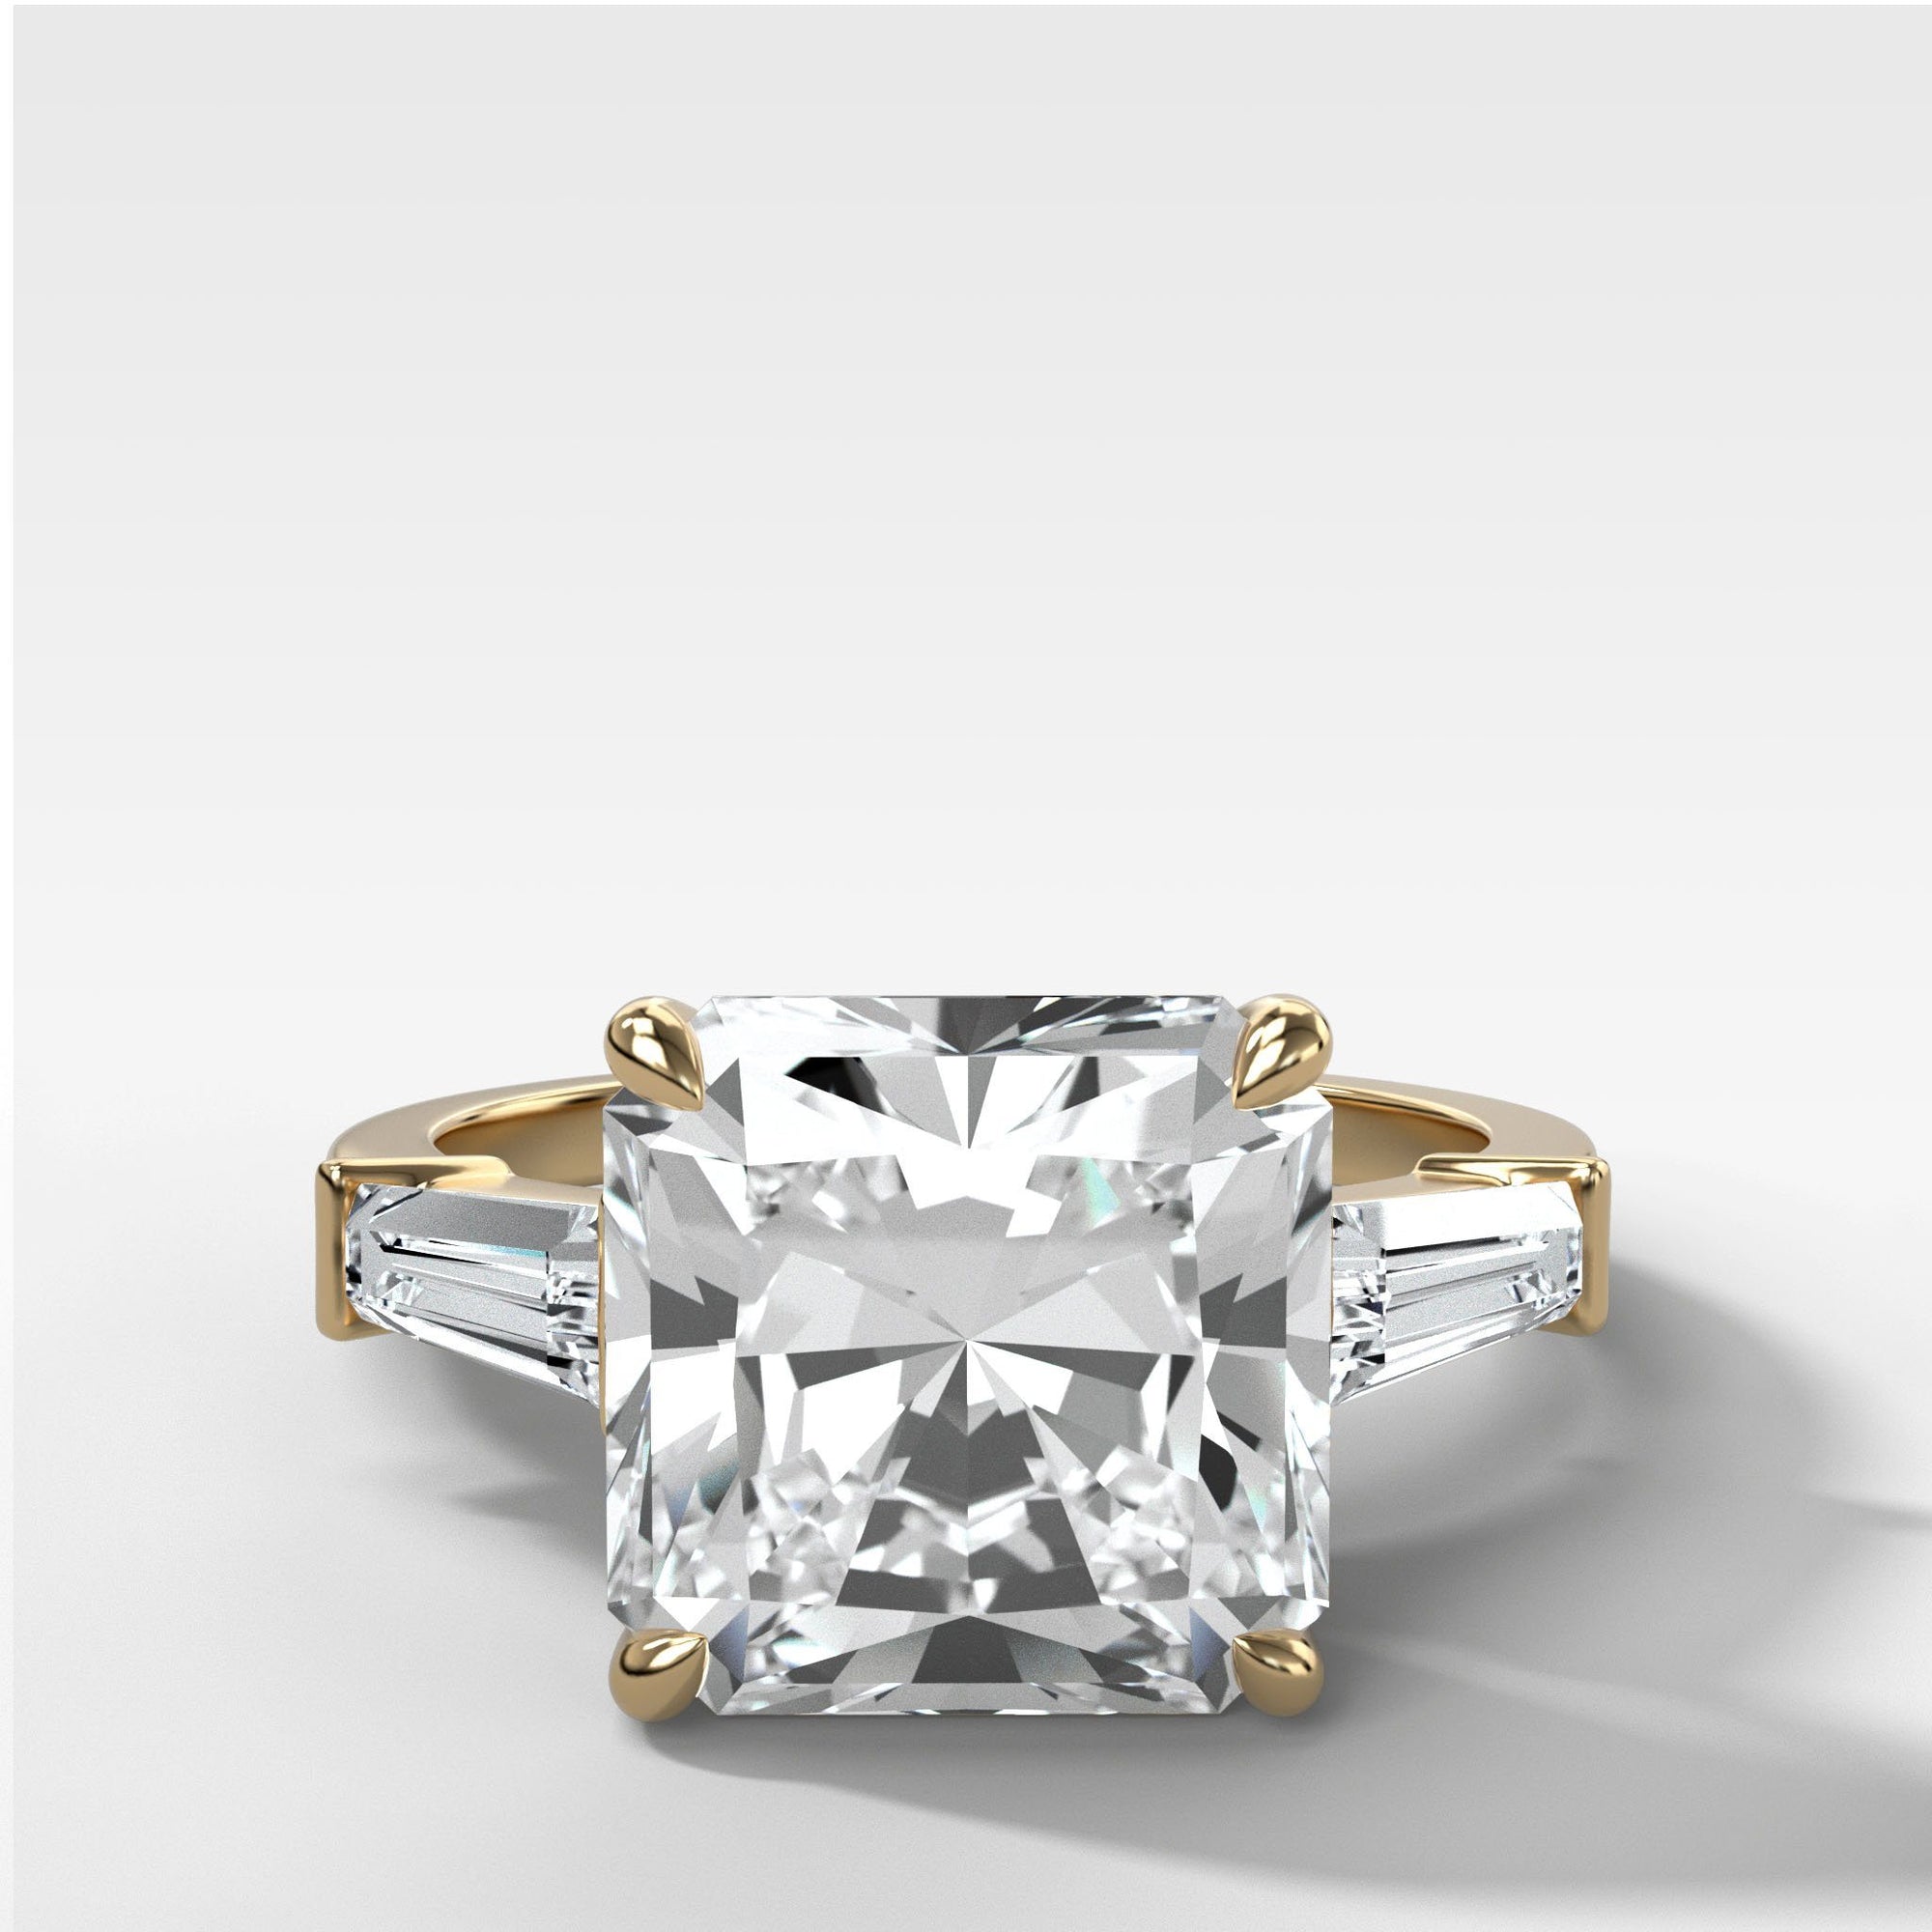 Translunar Tapered Baguette Engagement Ring With Square Cut by Good Stone in Yellow Gold